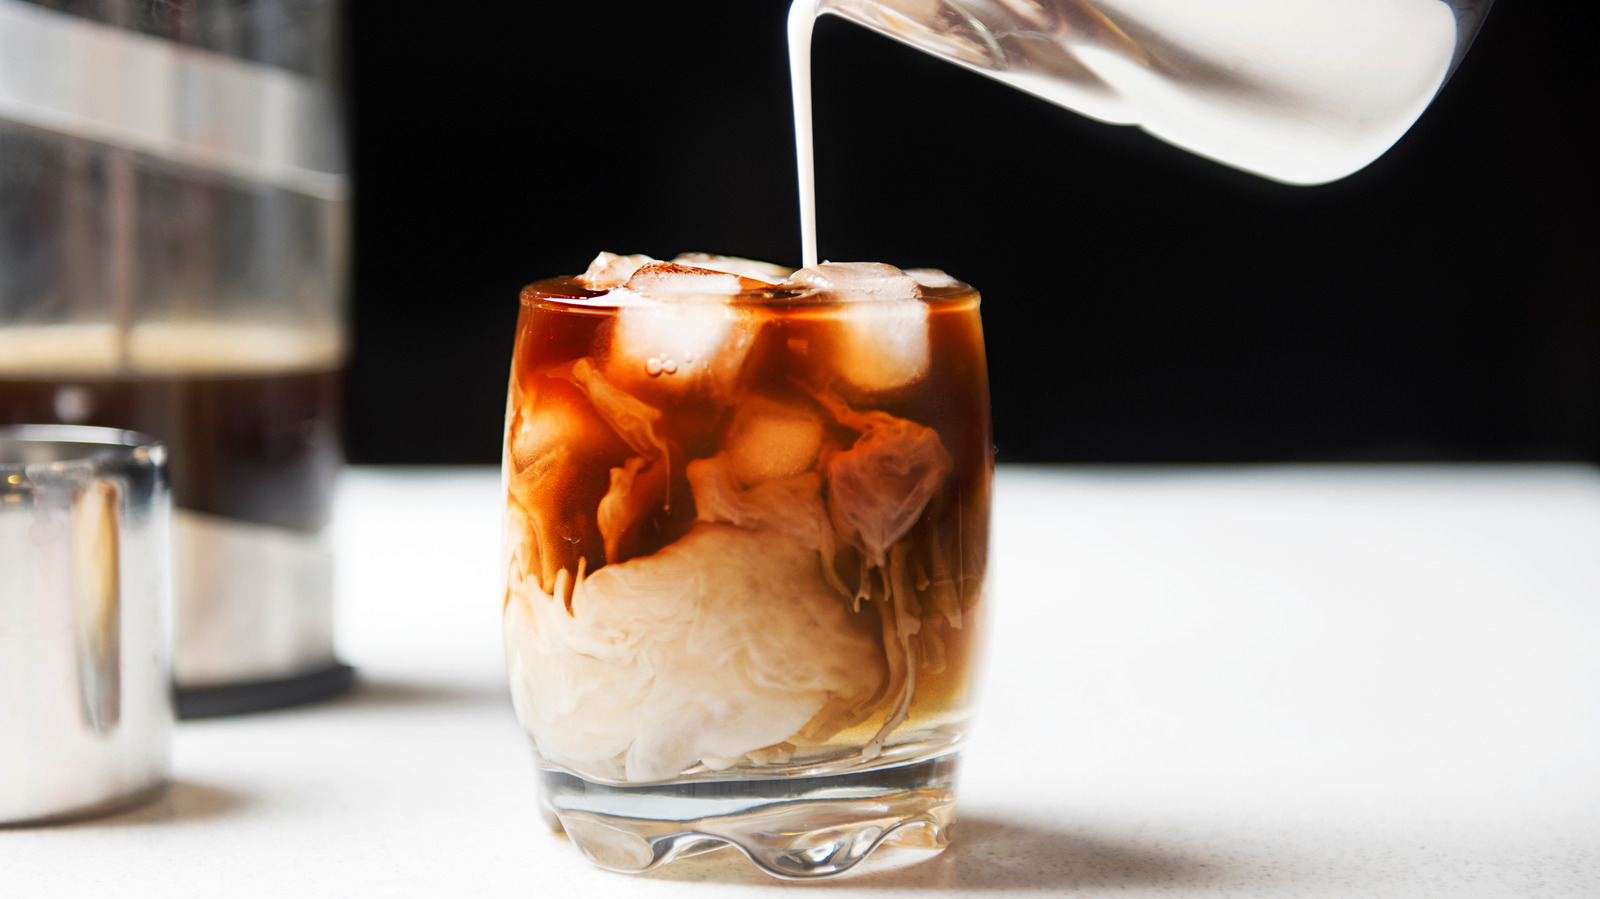 OXO Cold Brew Coffee Maker on Food52